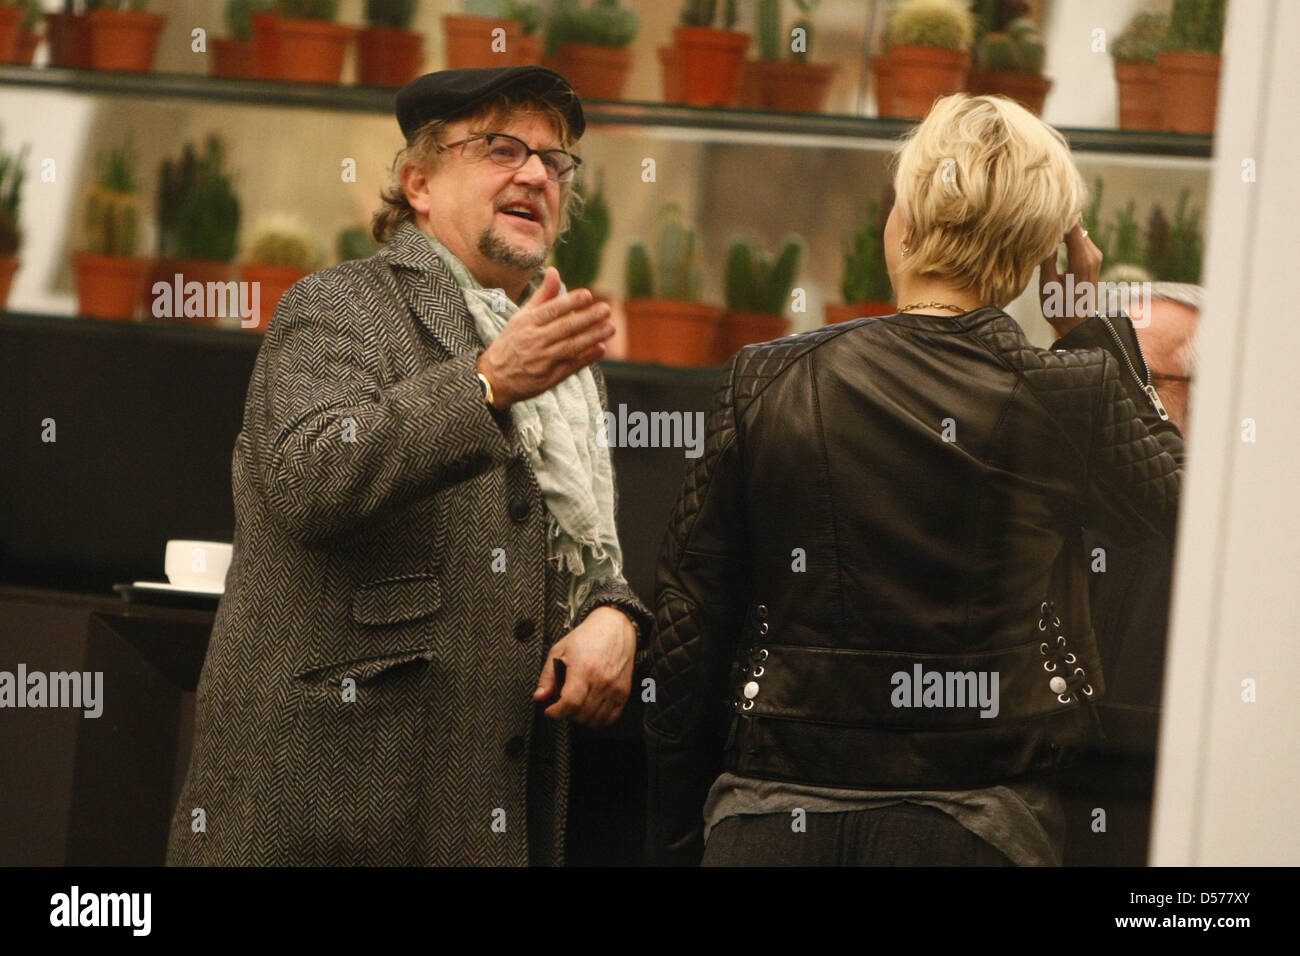 Martin Krug giving his expert opinion on how his girlfriend Verena Kerth looks in a new leather jacket which she's trying on at Stock Photo